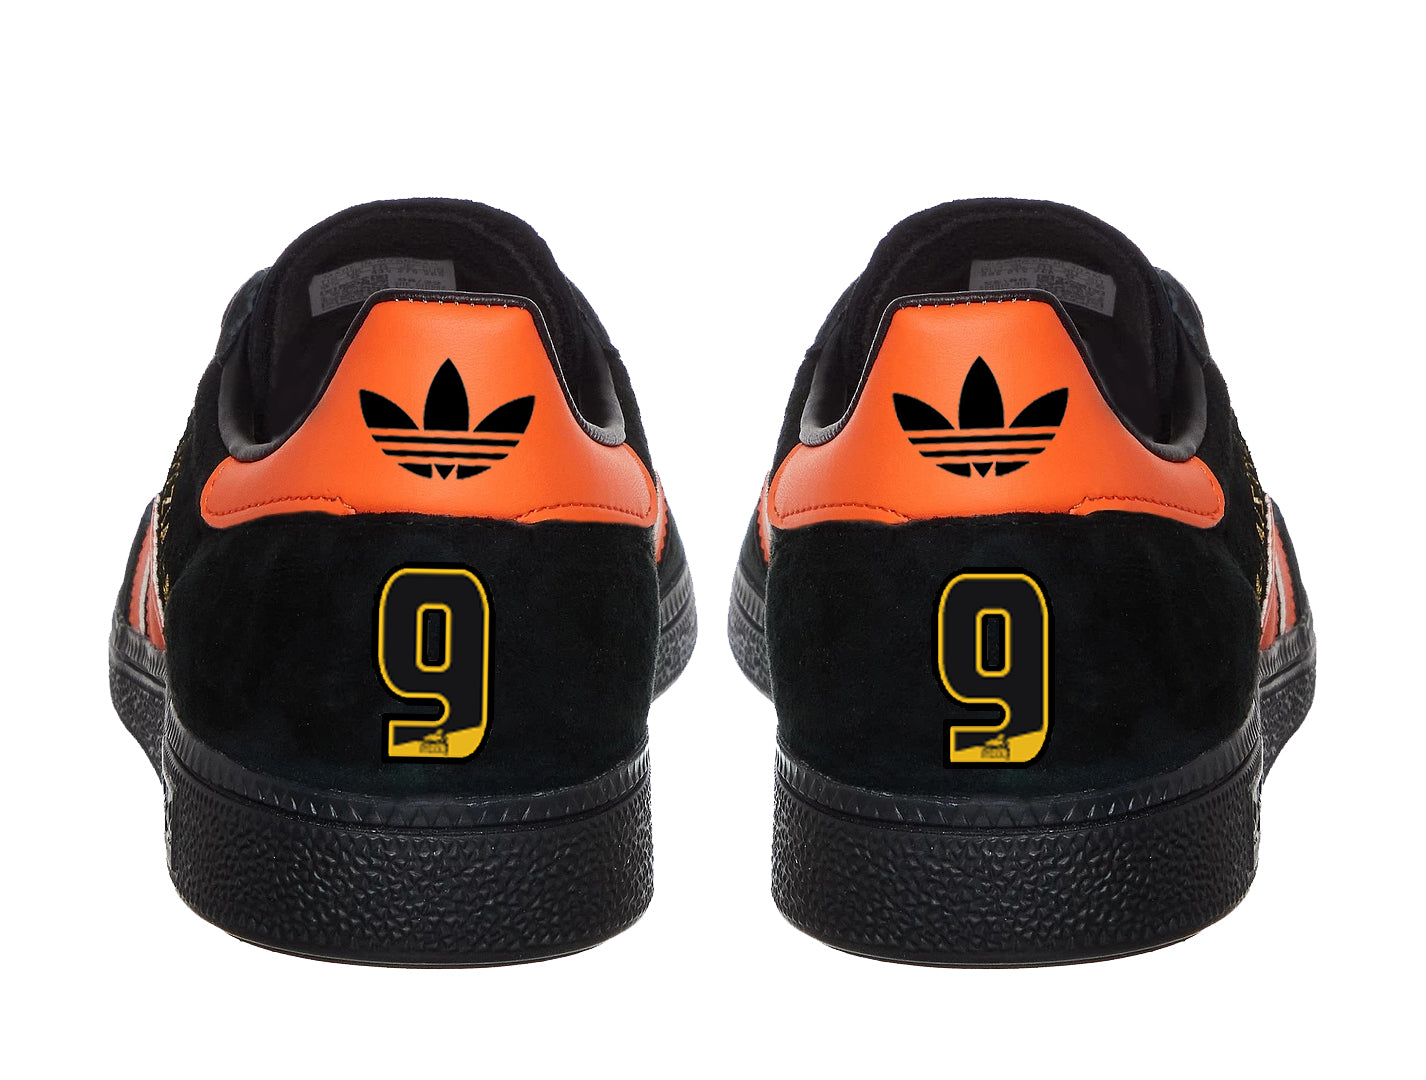 Limited edition Hull City FC Dean Windass inspired black / orange suede Adidas Handball Spezial trainers / sneakers